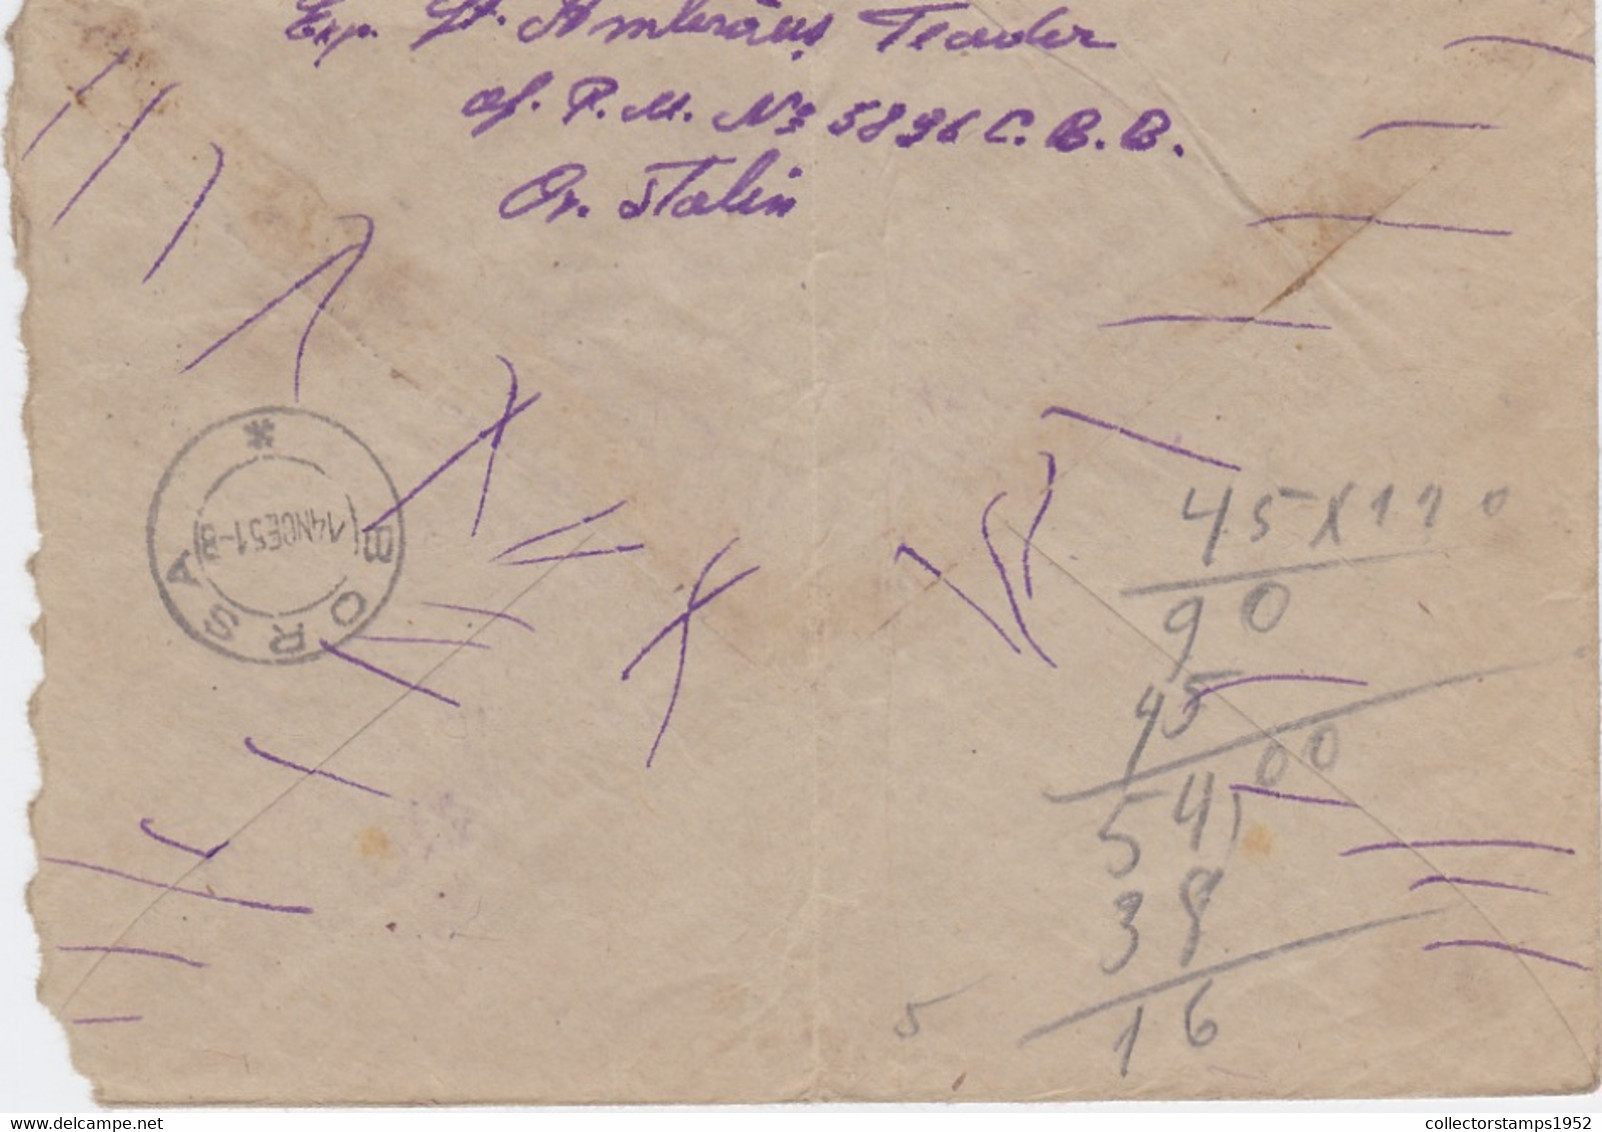 W0447- REPUBLIC COAT OF ARMS STAMP ON COVER, 1951, ROMANIA - Covers & Documents